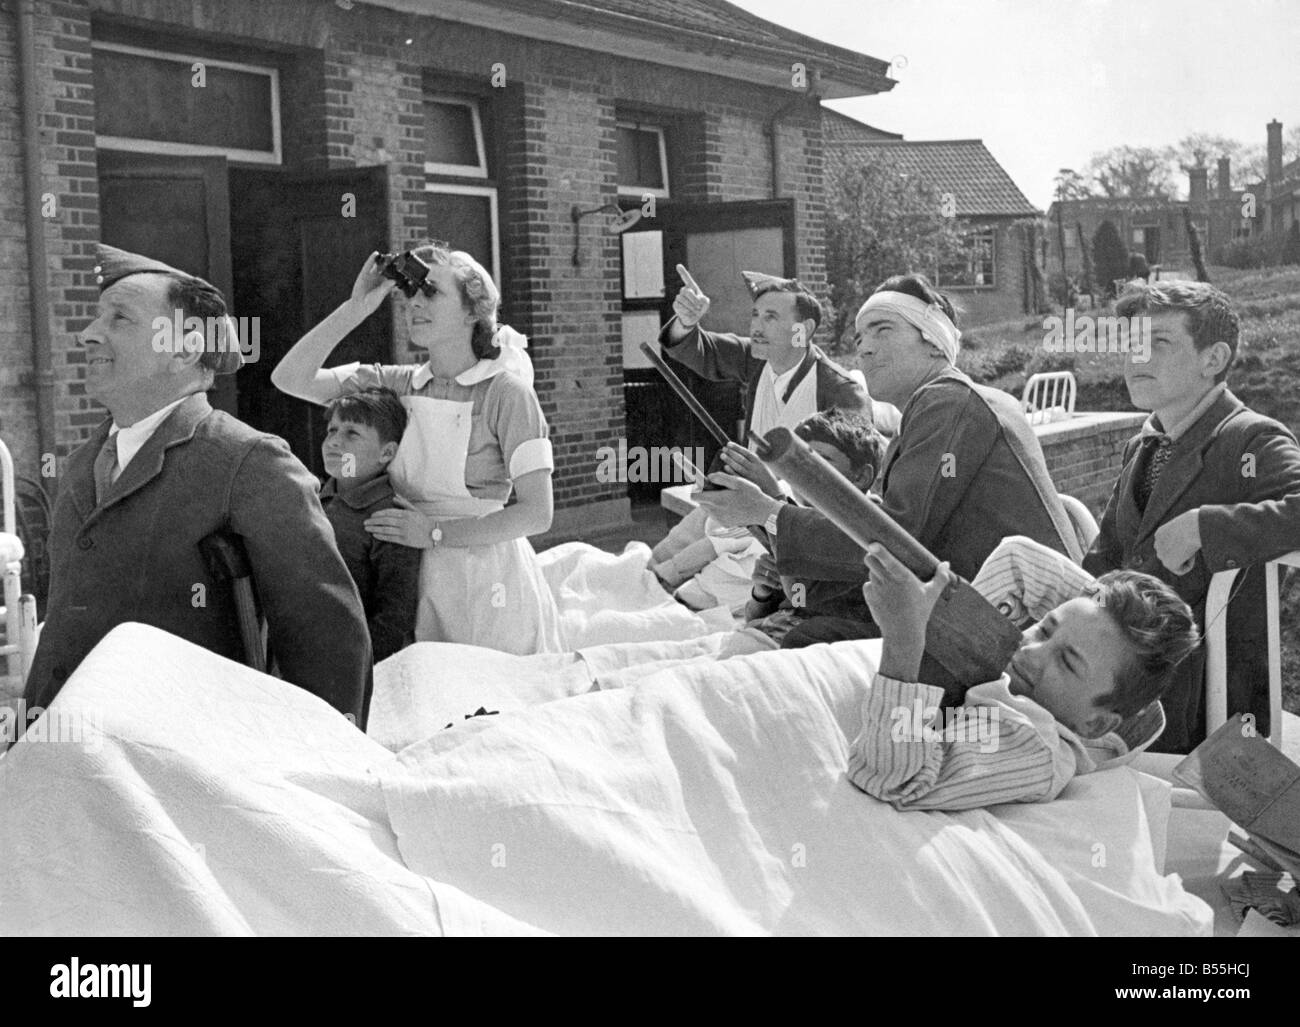 World War II: Hospitals. Nurses and patients watch the dogfights between the R.A.F. and the German Airforce at the height of the Battle of Britain. August 1940 P012079 Stock Photo